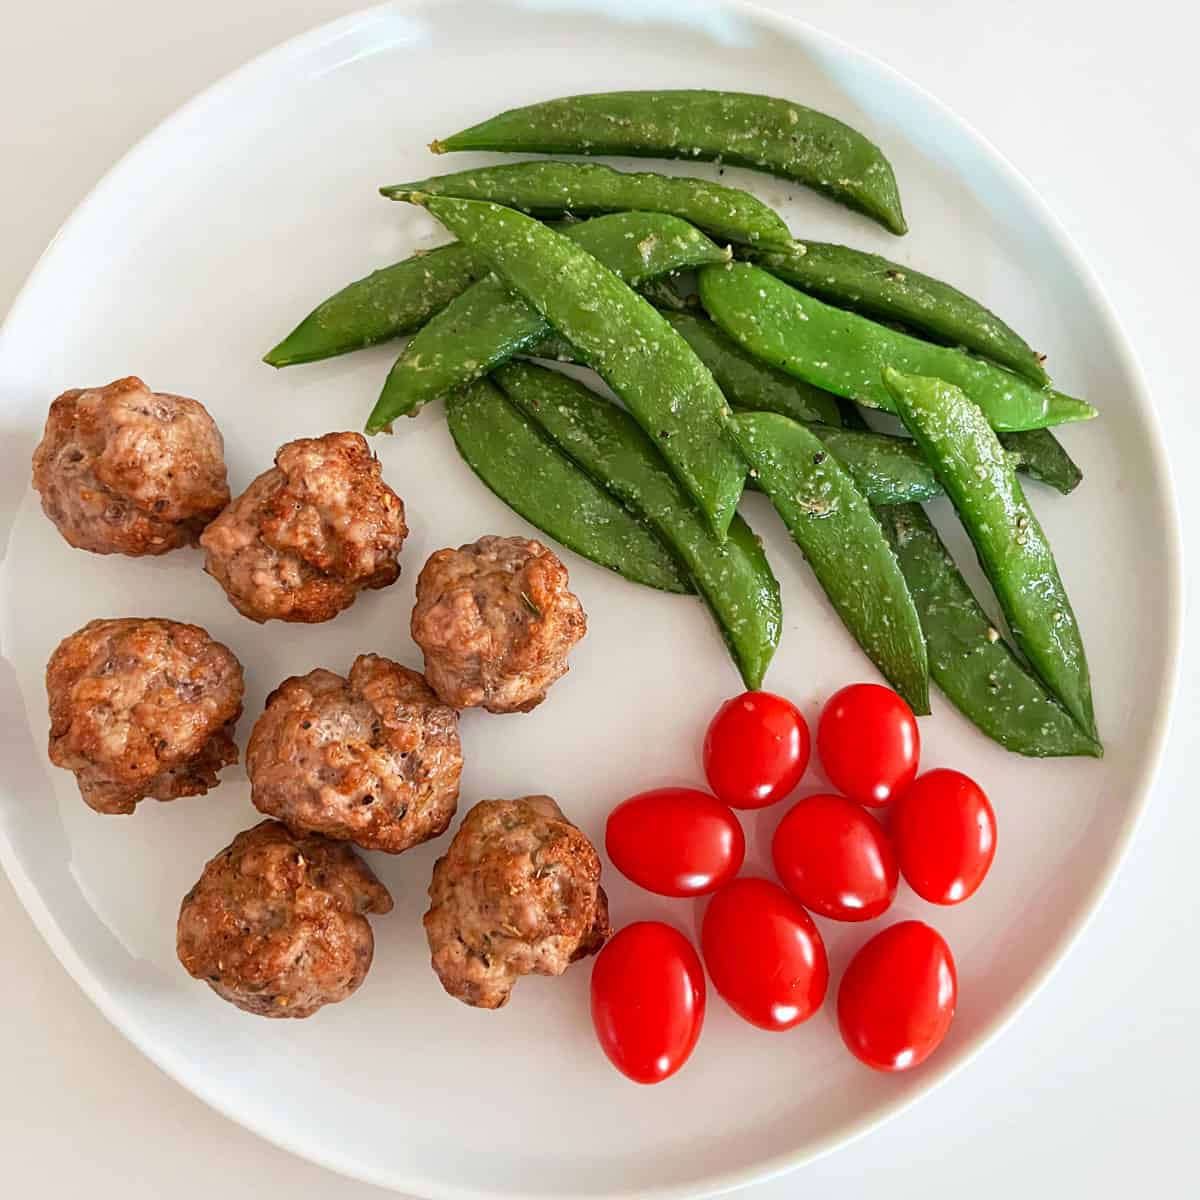 sugar snap peas are served on a white plate with pork meatballs and cherry tomatoes.